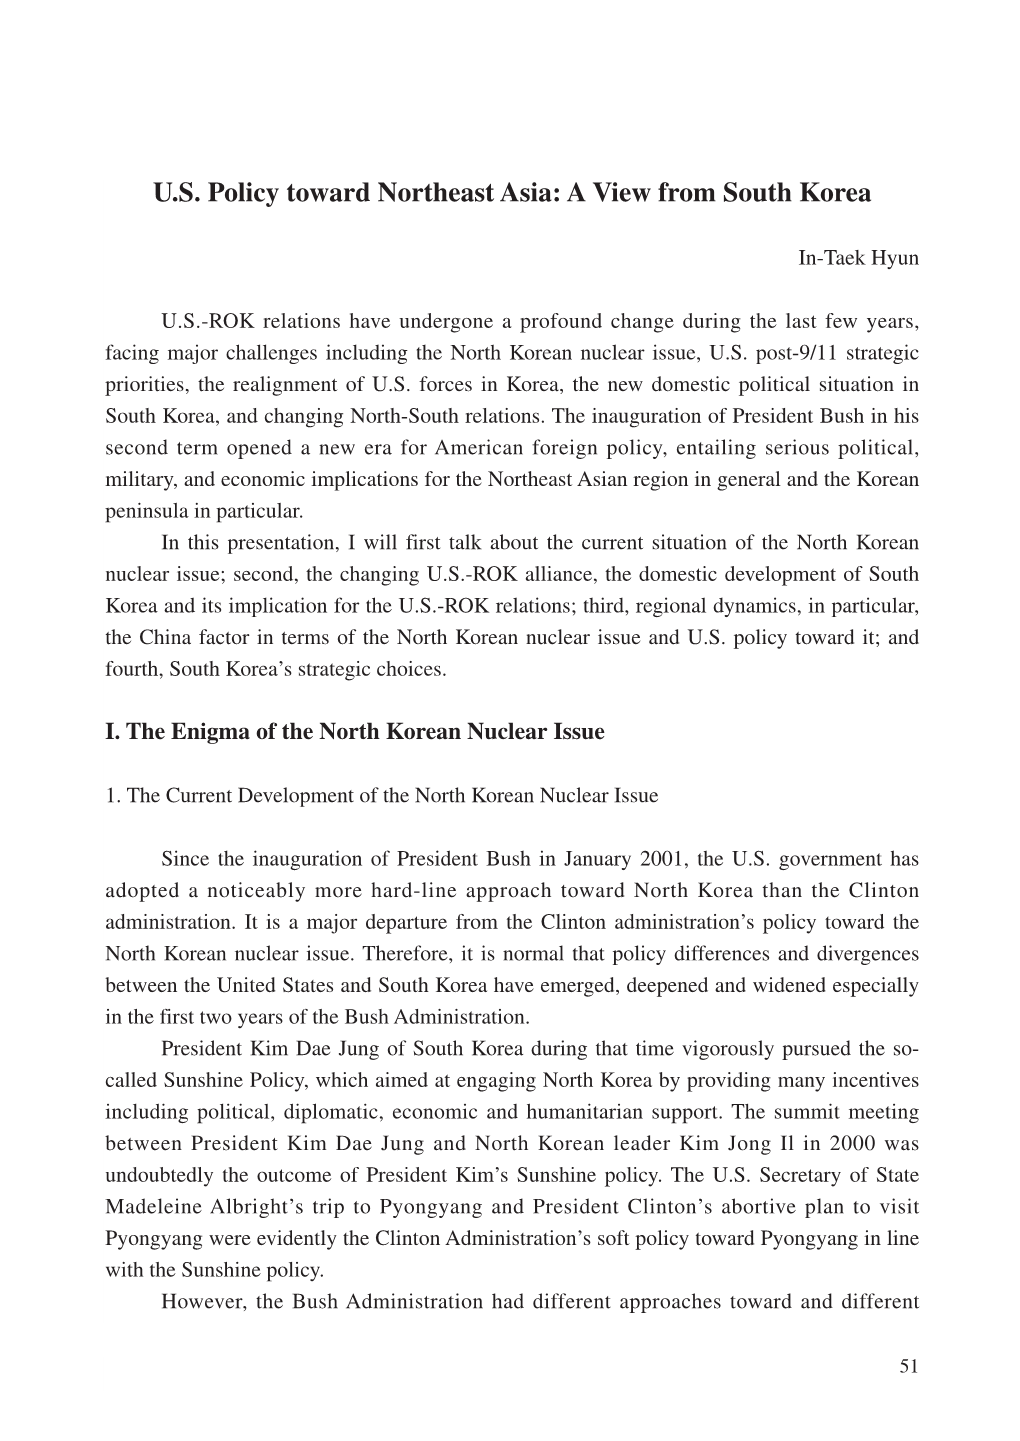 U.S. Policy Toward Northeast Asia: a View from South Korea